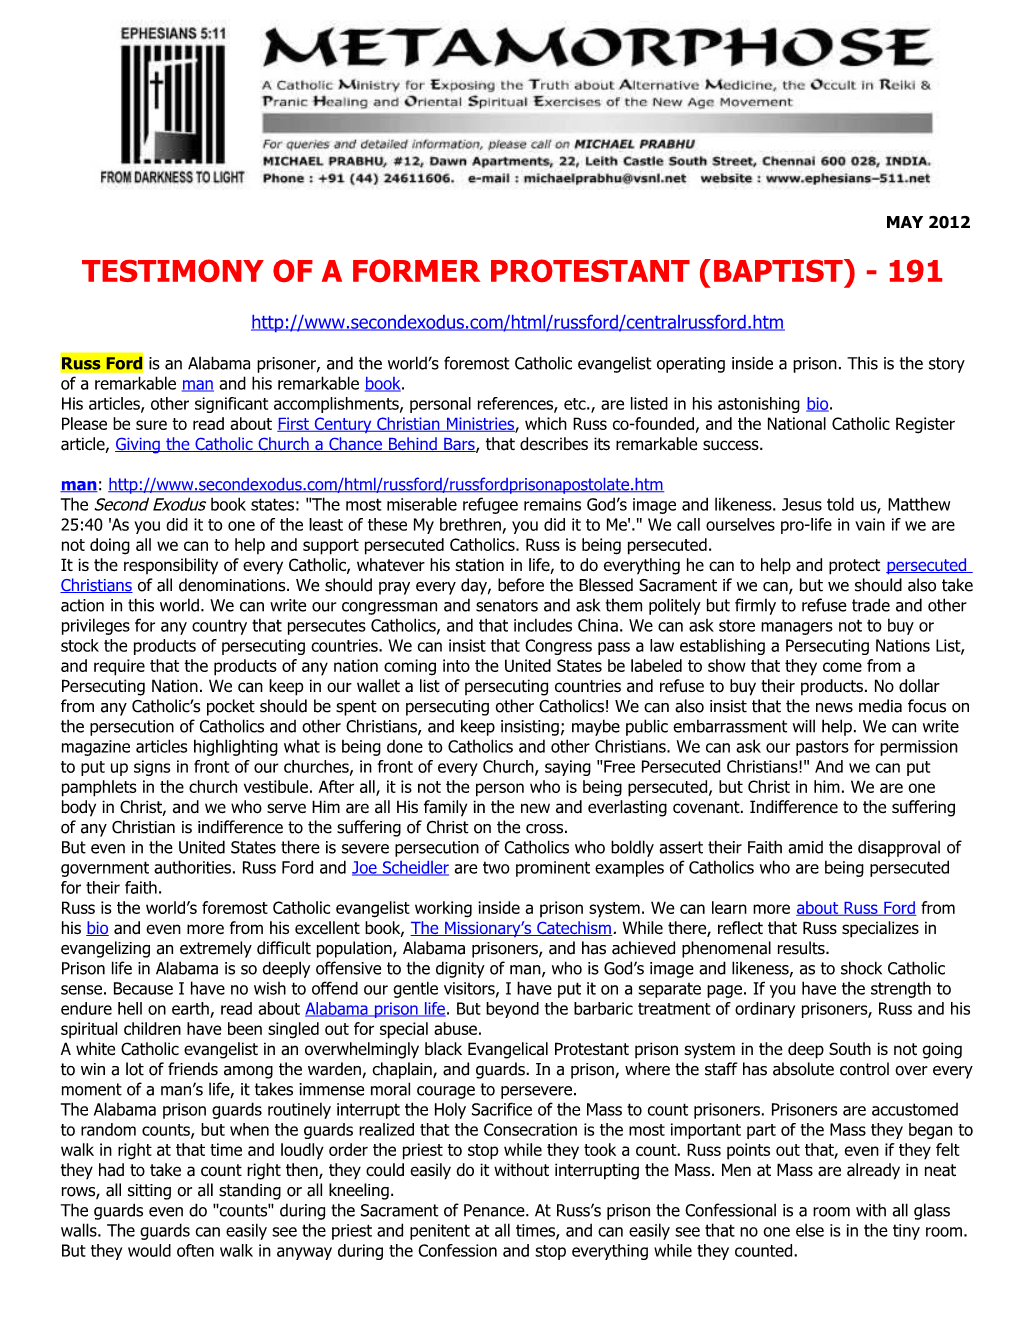 Testimony of a Former Protestant (Baptist) - 191